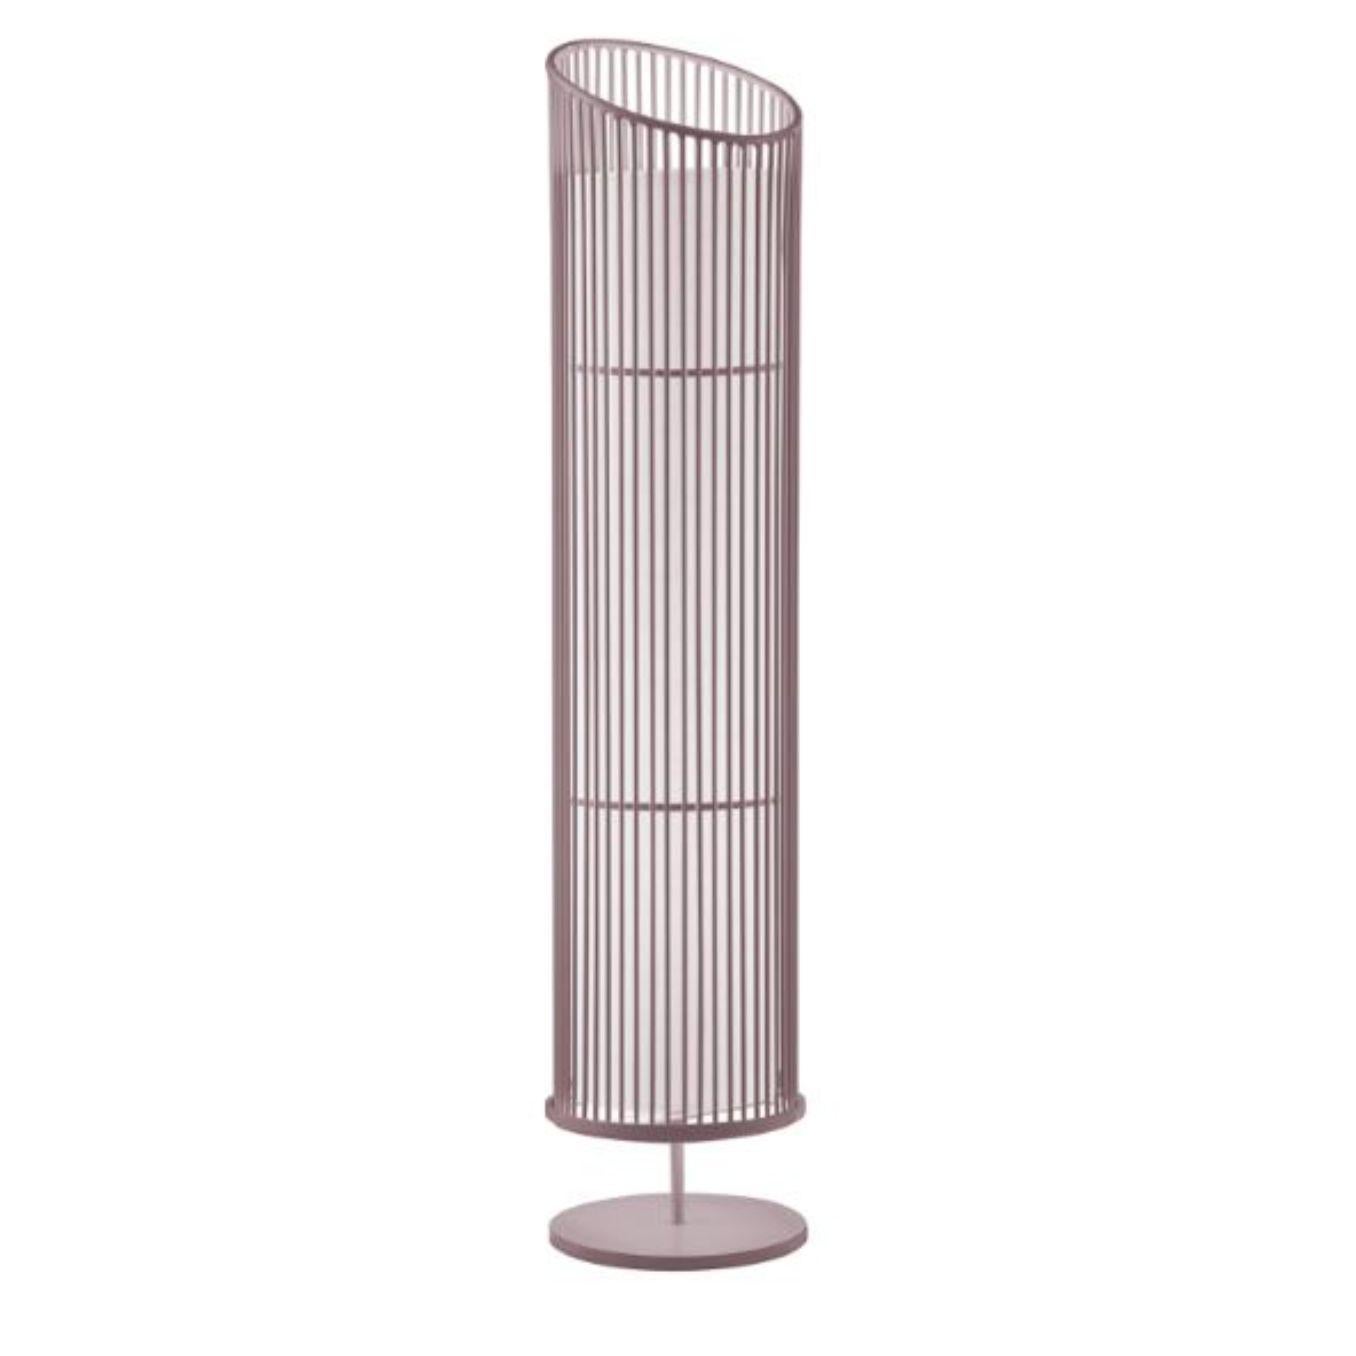 Lilac new spider floor lamp by Dooq
Dimensions: W 30 x D 30 x H 140 cm
Materials: lacquered metal, polished or brushed metal.
abat-jour: cotton
Also available in different colors and materials.

Information:
230V/50Hz
E27/2x20W